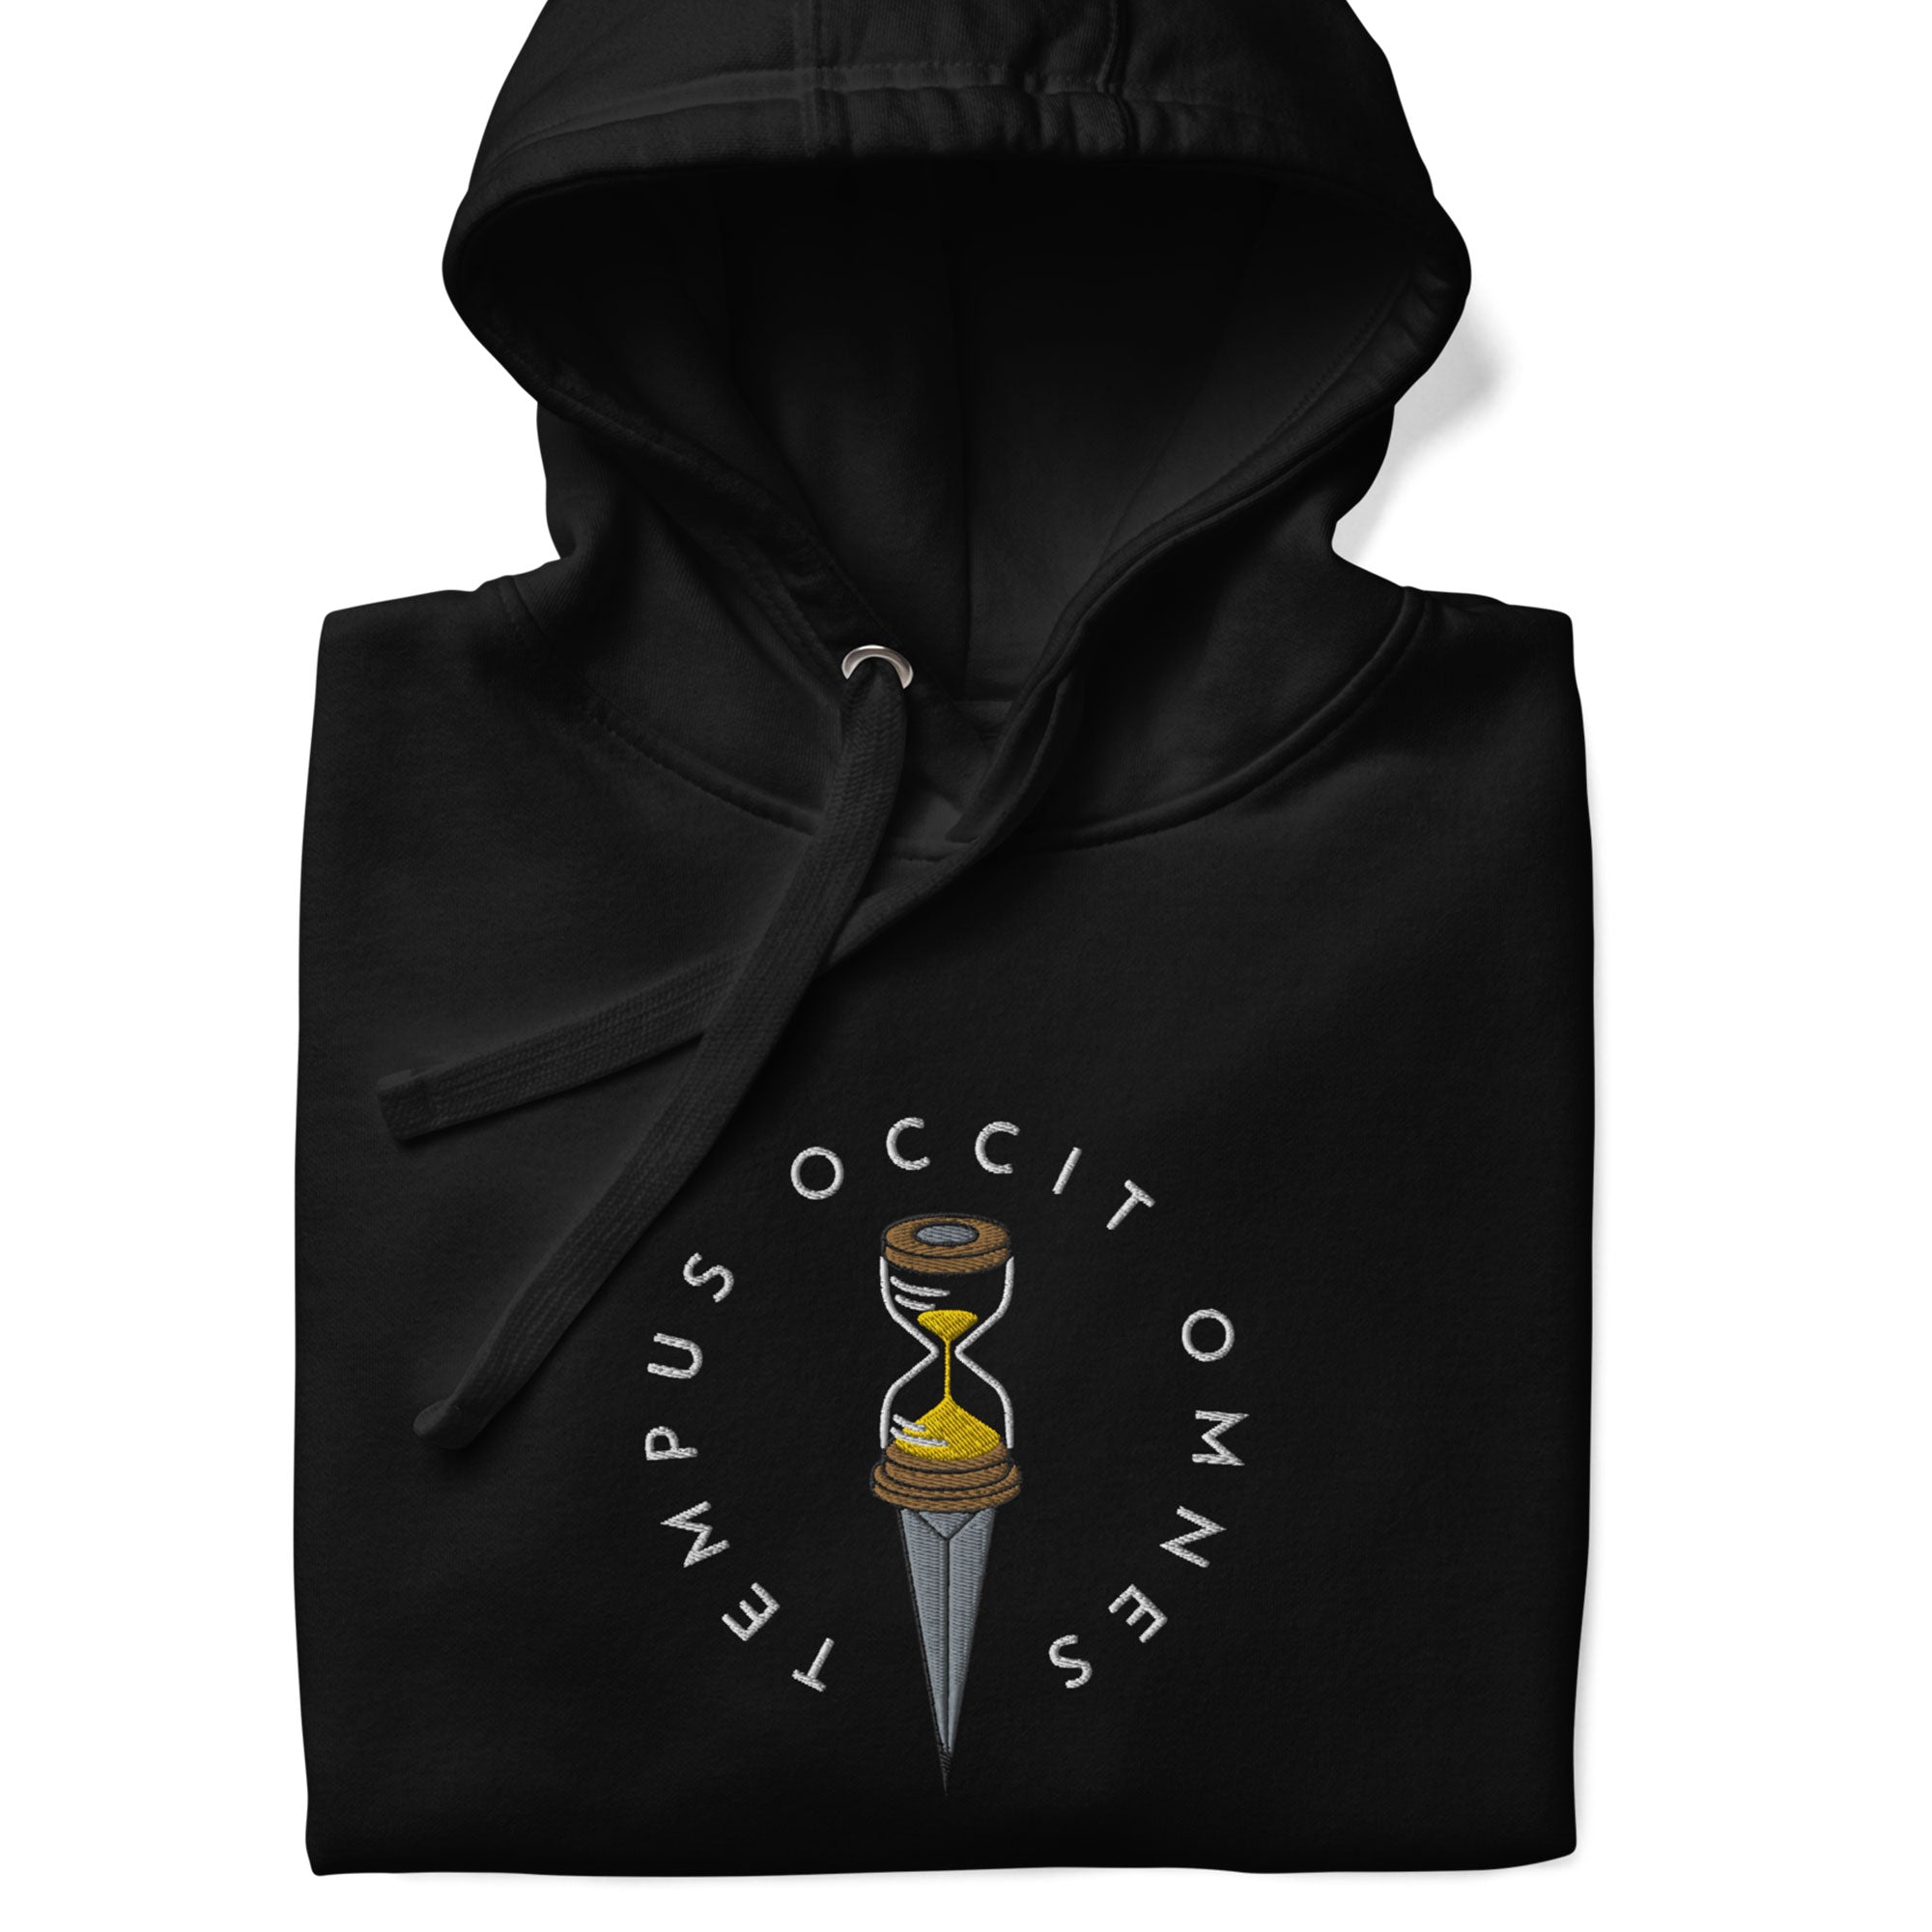 Tempus Occit Omnes Time Kills All Embroidered Hoodie